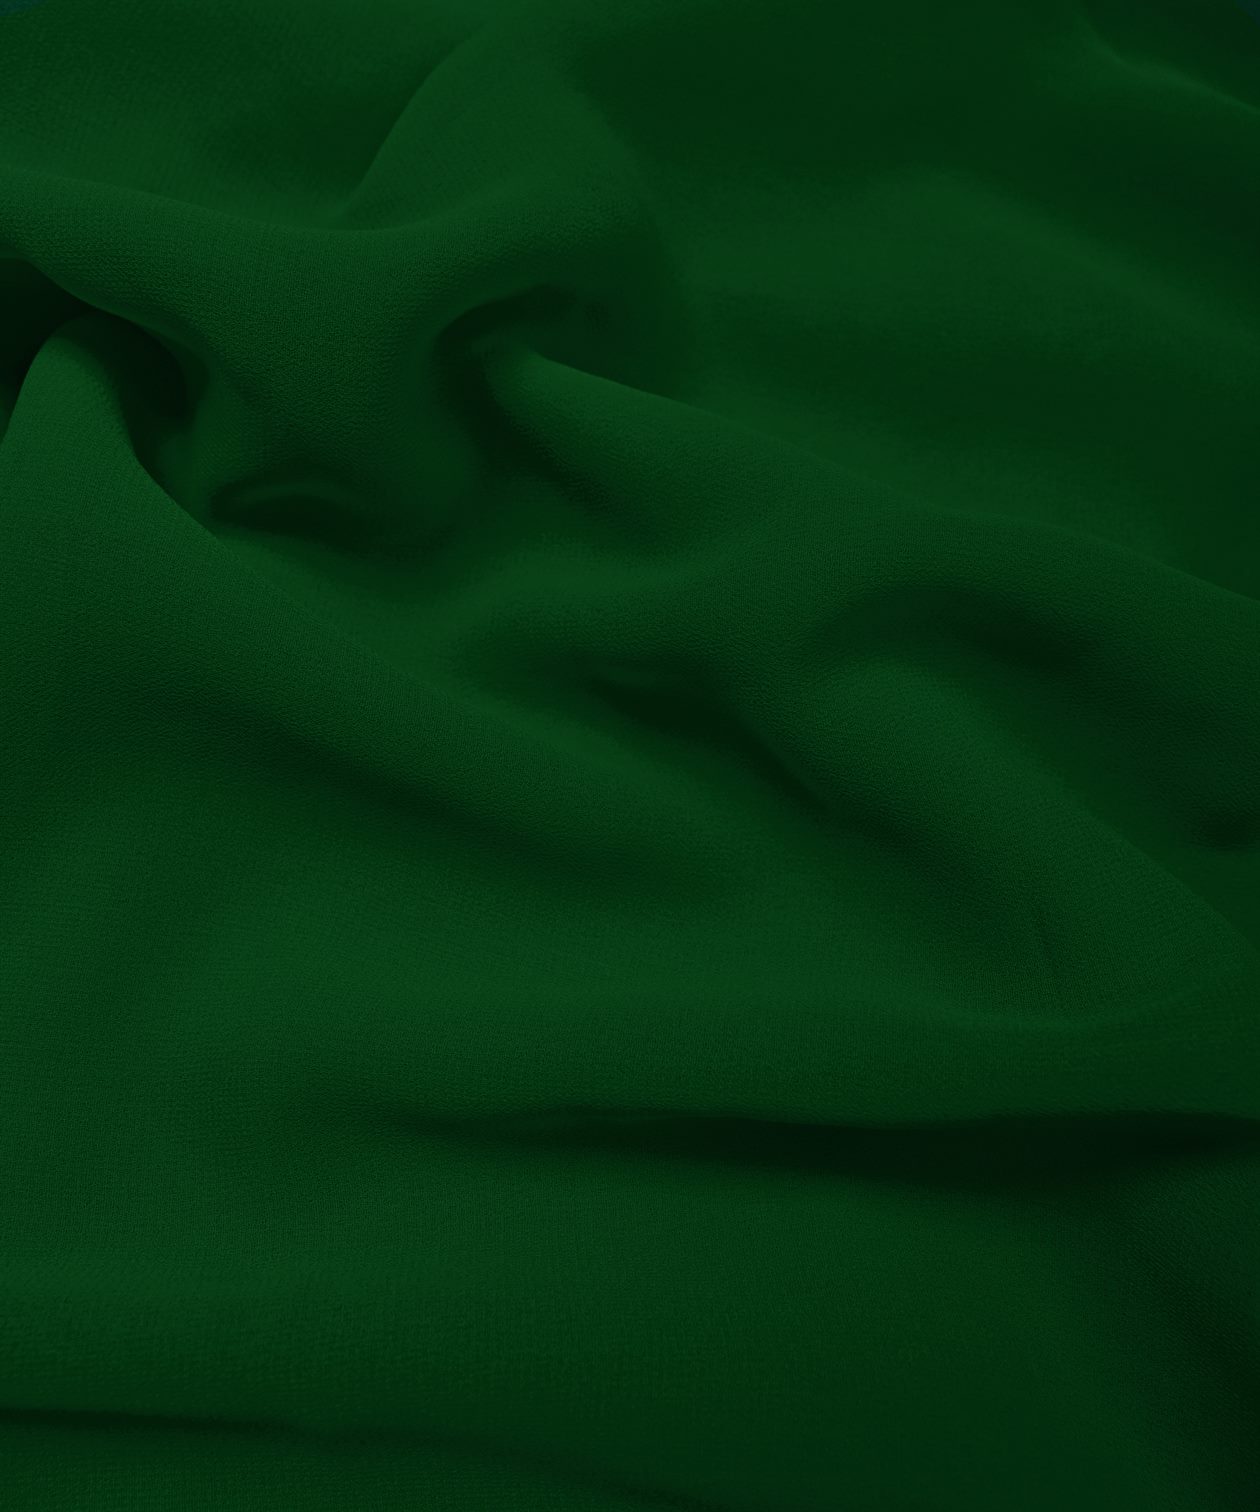 Cationic Dark Green Plain Dyed Georgette (60 Grams) Fabric